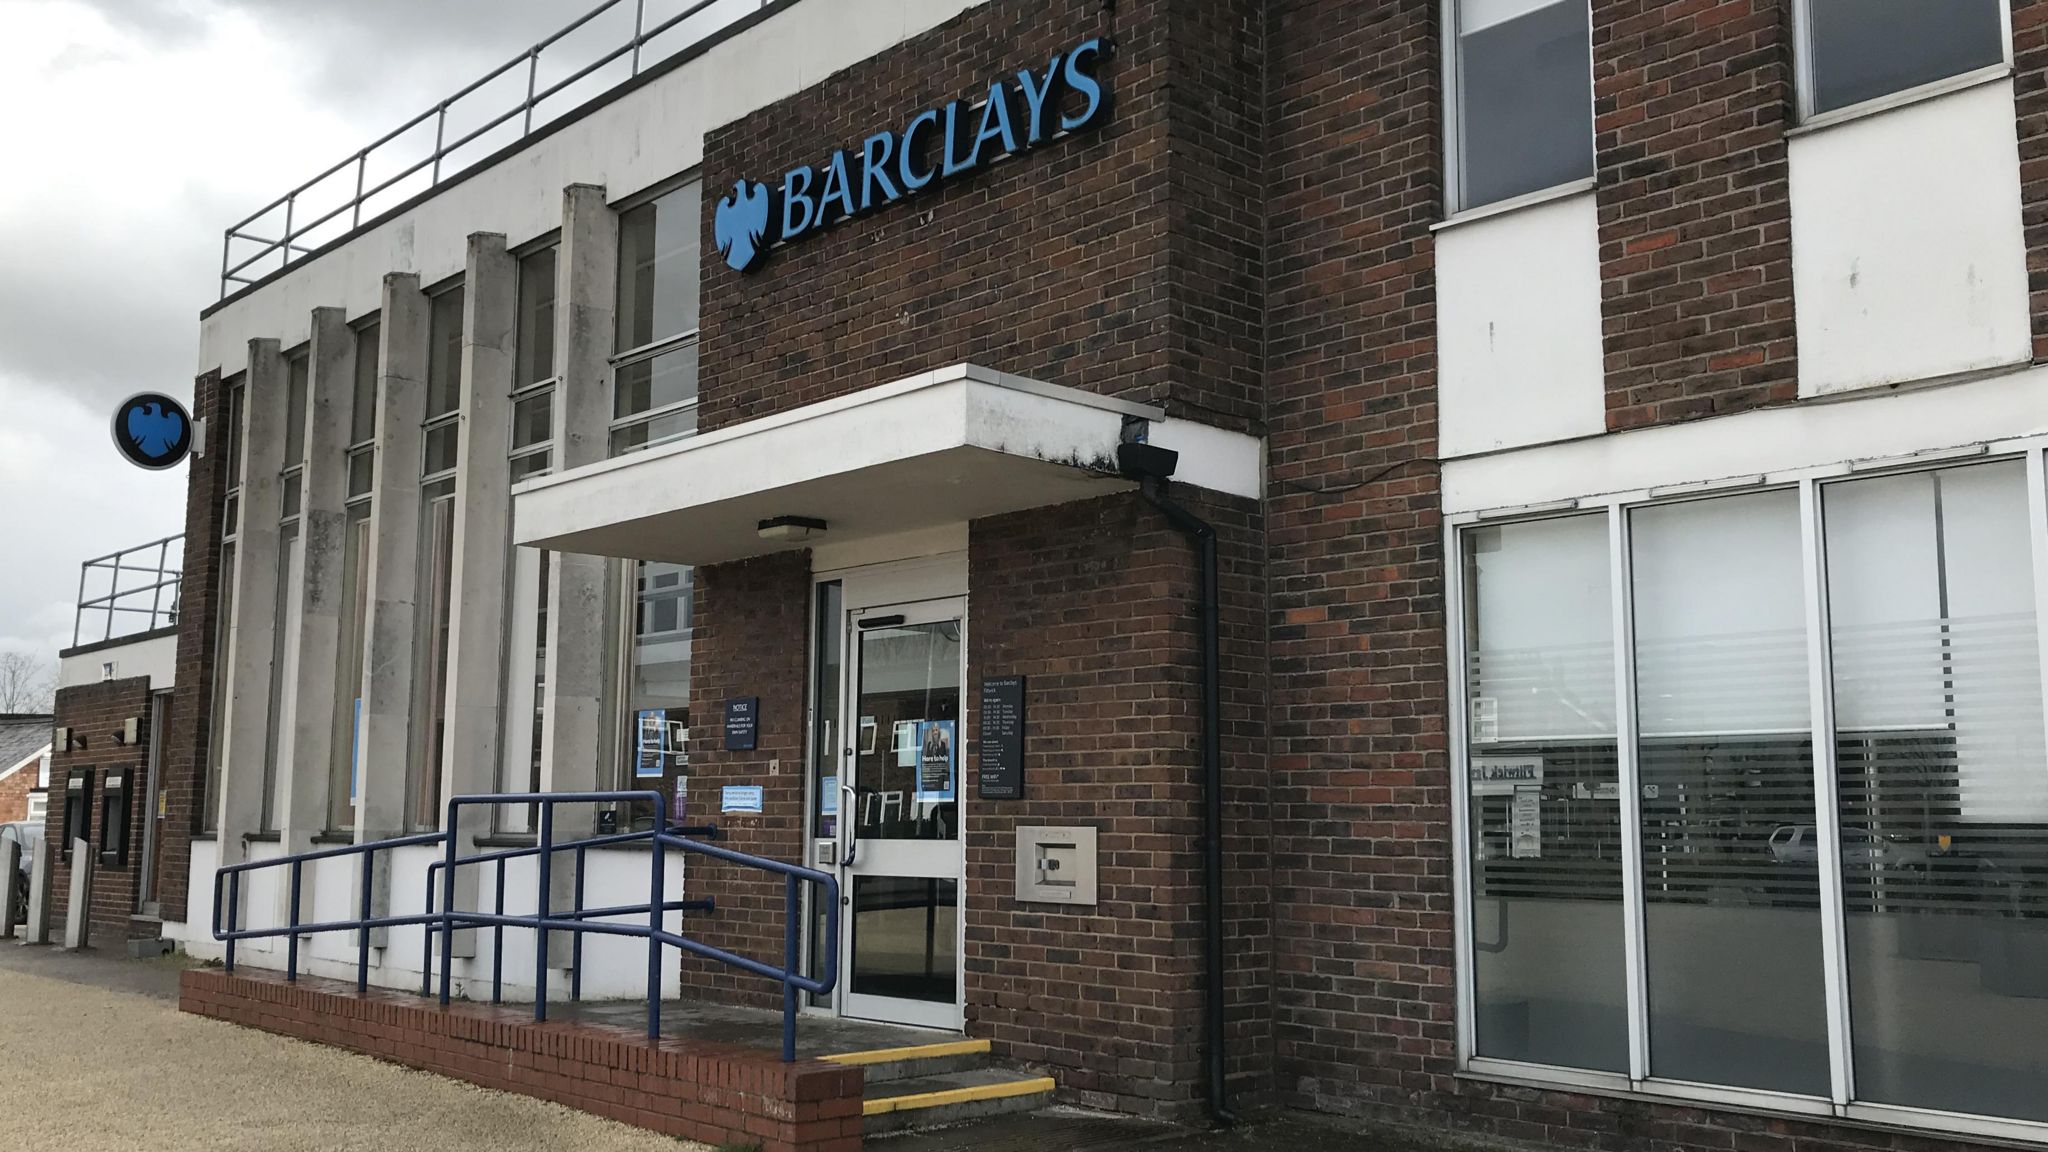 Barclays bank in Flitwick, Bedfordshire